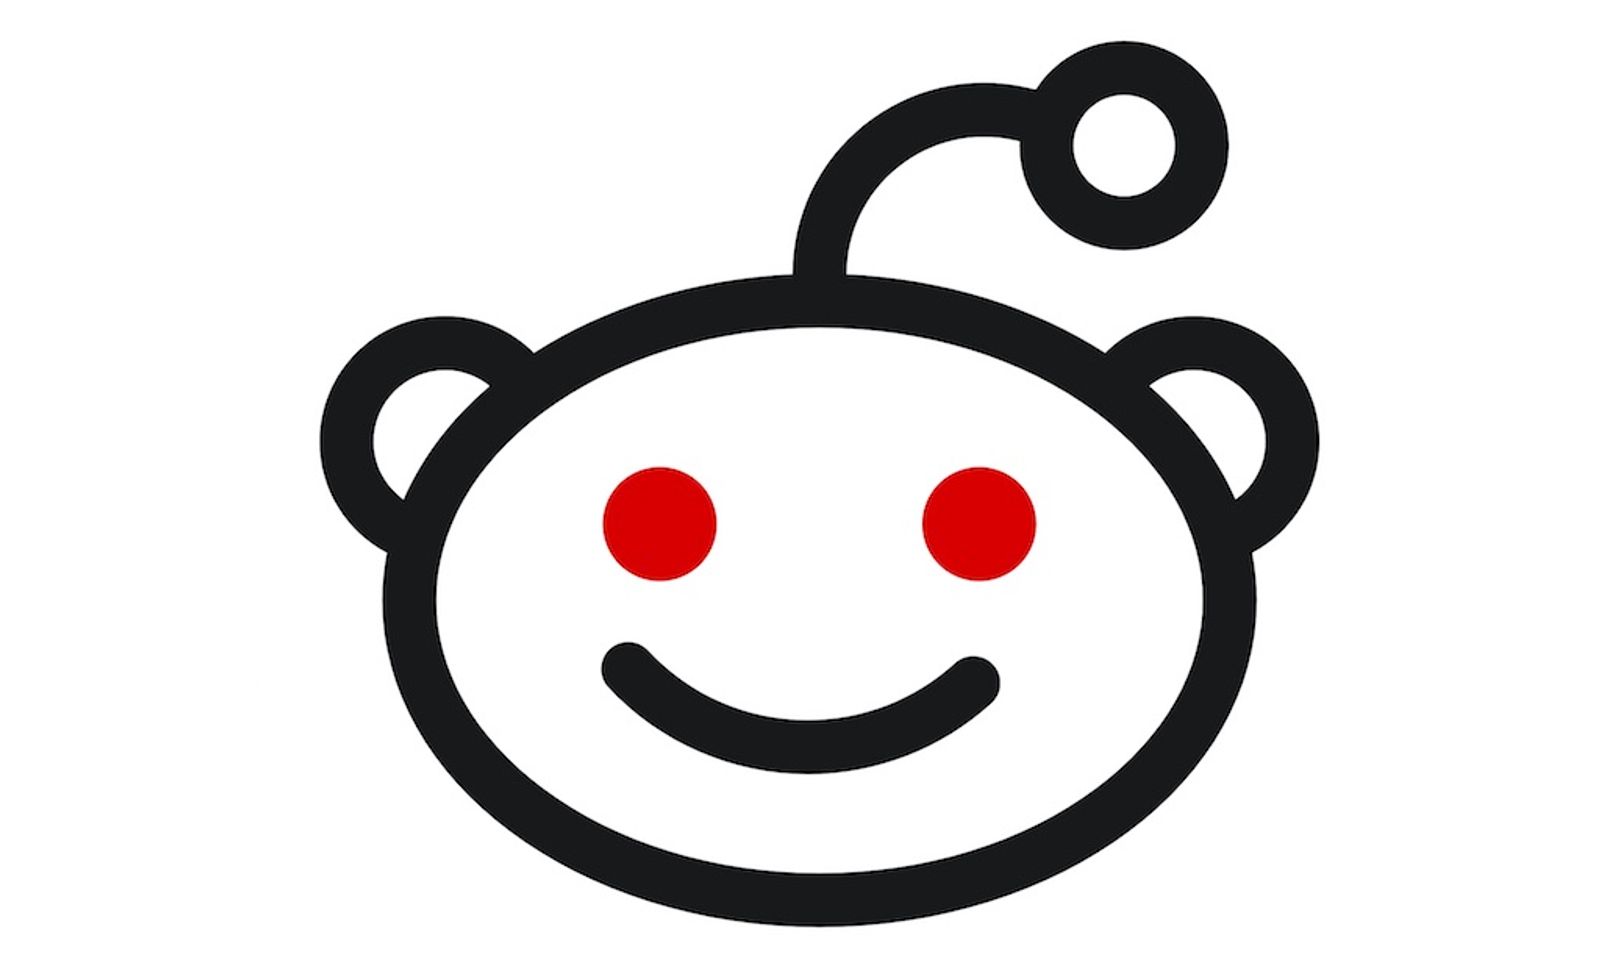 Reports: India ISPs Have Now Blocked Reddit, Possibly Due to Porn